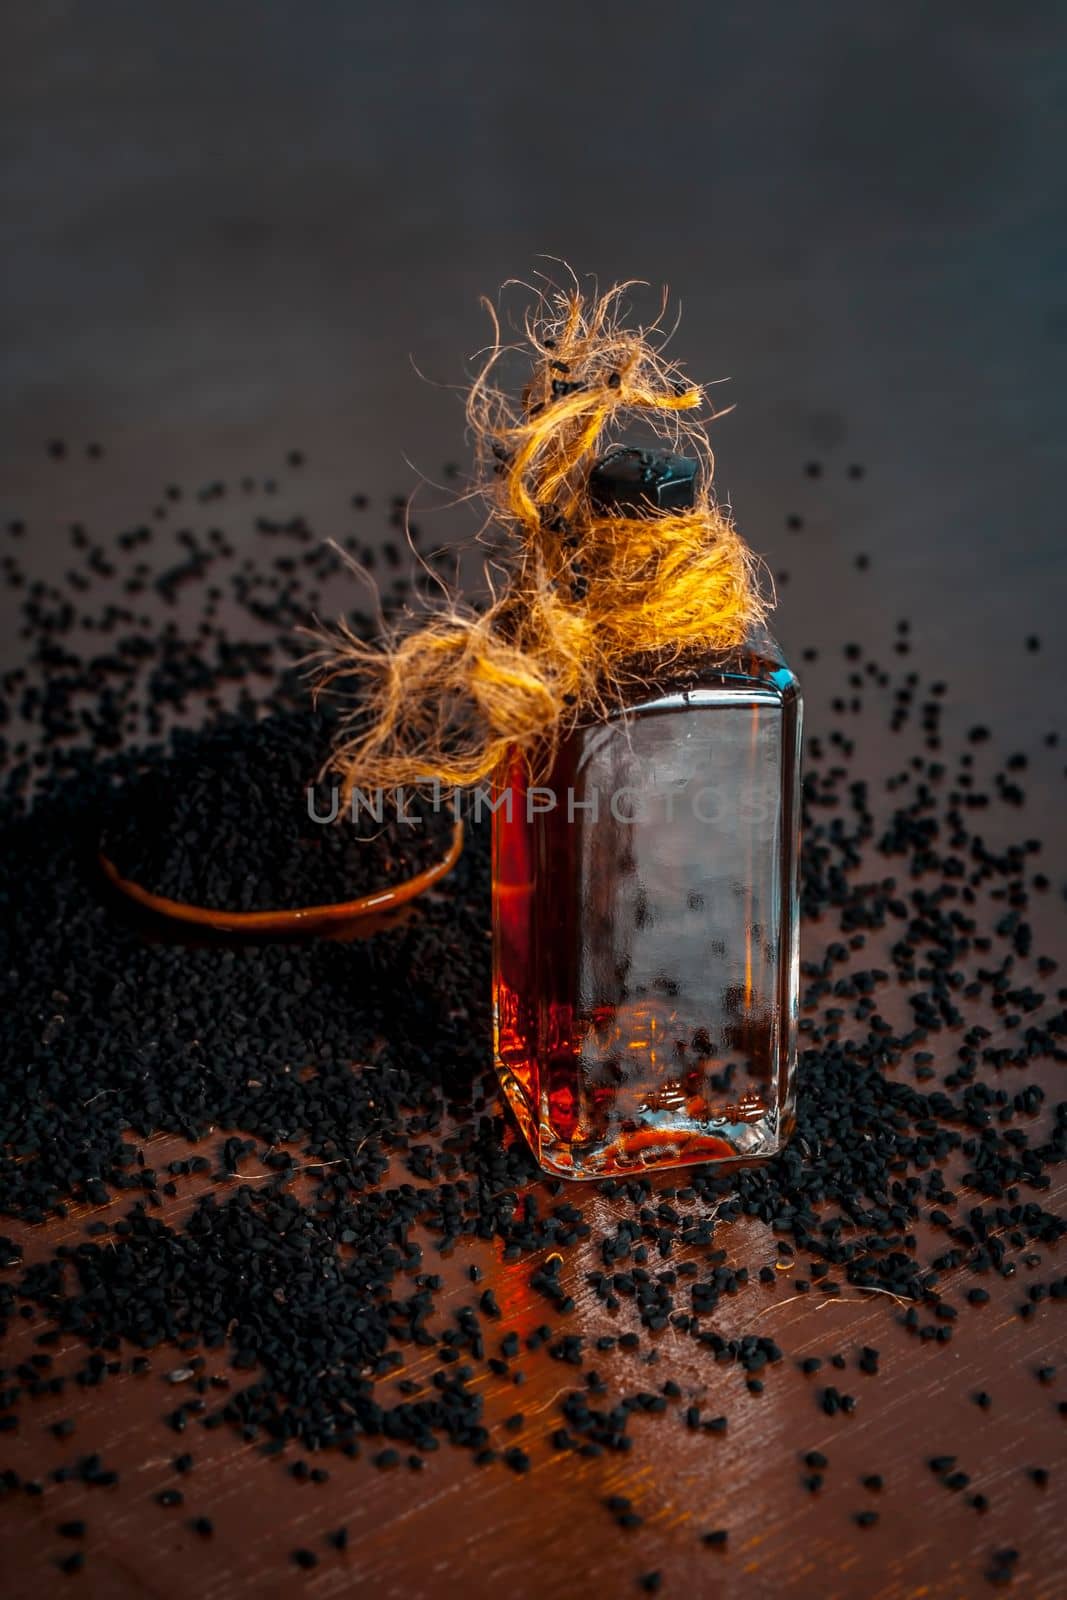 AYURVEDIC HERB i.e. Kalonji,black caraway seeds with its beneficial and essential oil on a brown surface in dark Gothic colors.This oil is used in weight loss,lowing the blood sugar/diabetes etc.